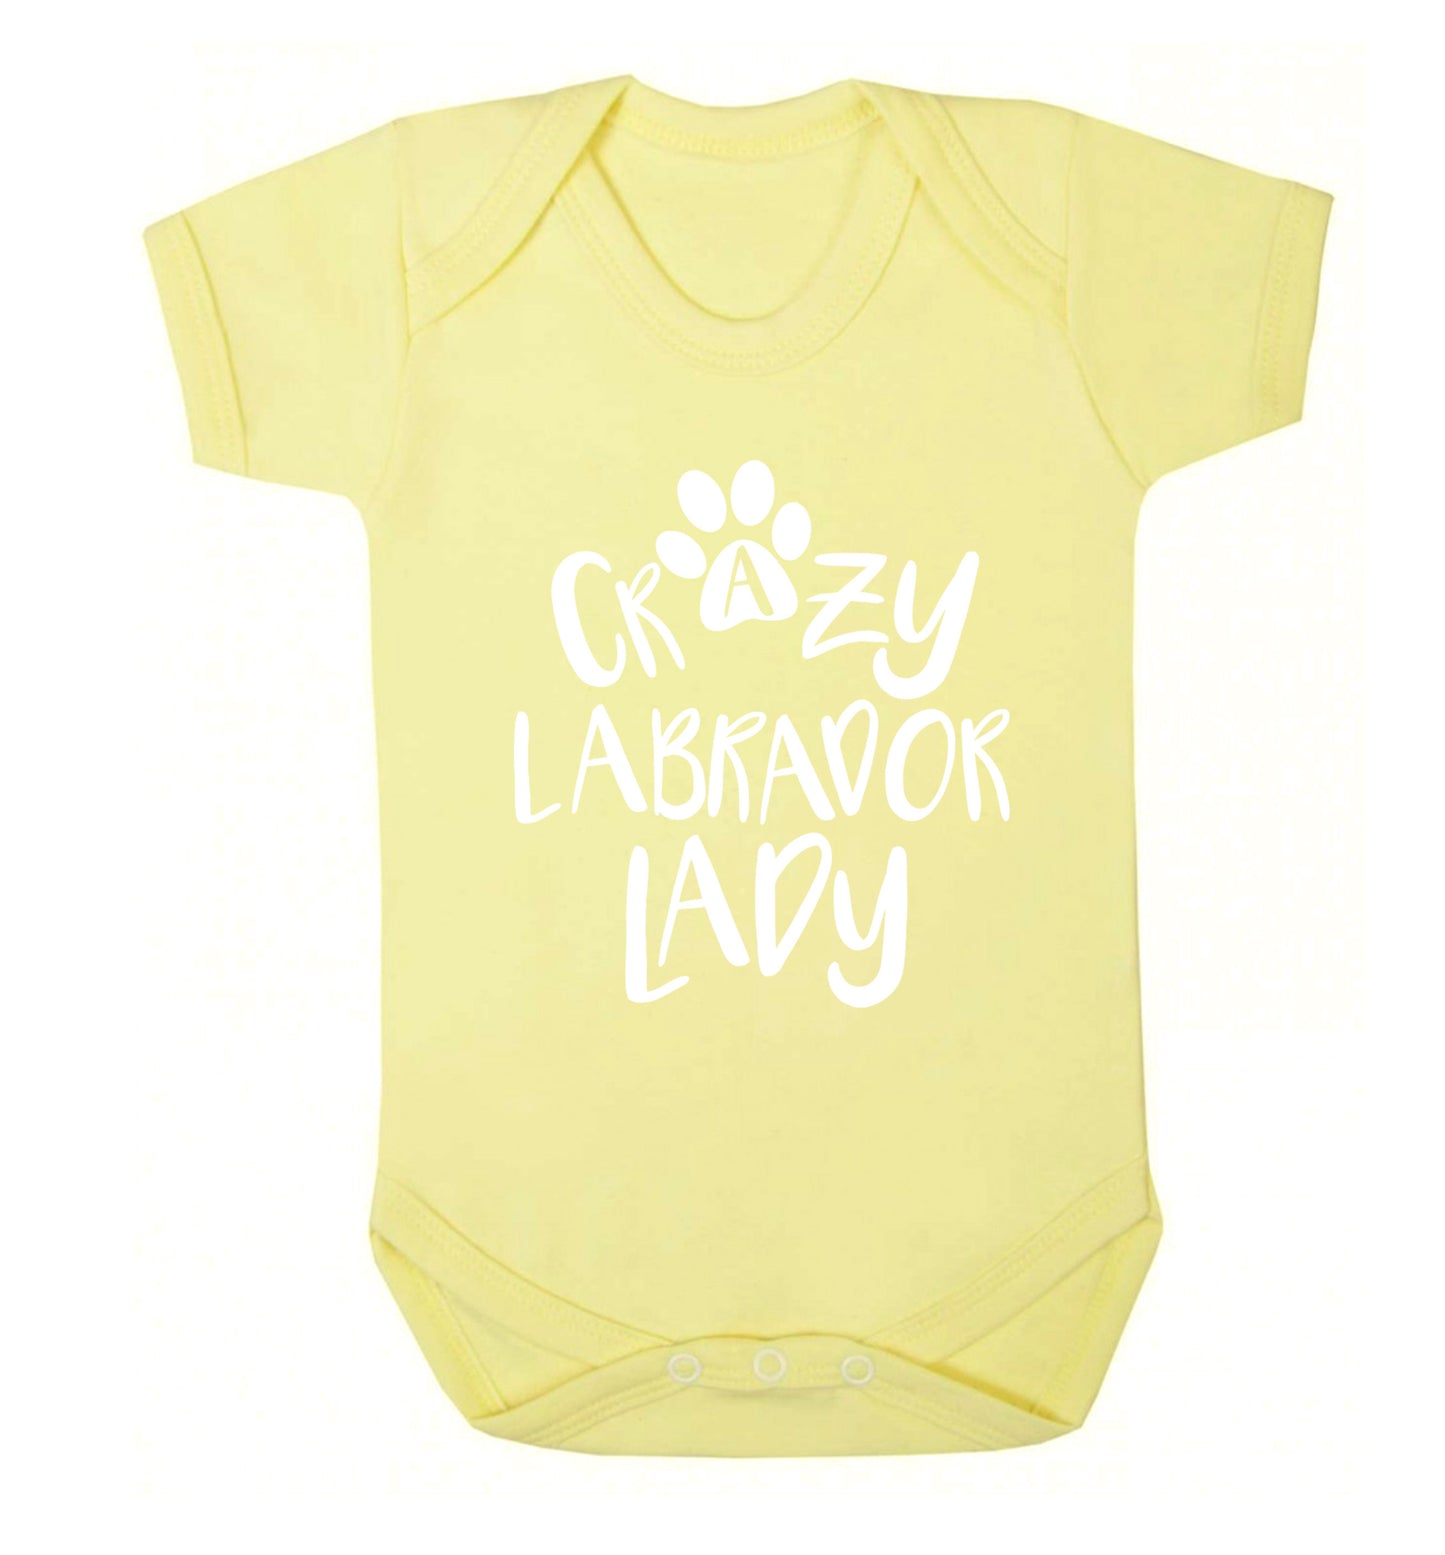 Crazy labrador lady Baby Vest pale yellow 18-24 months